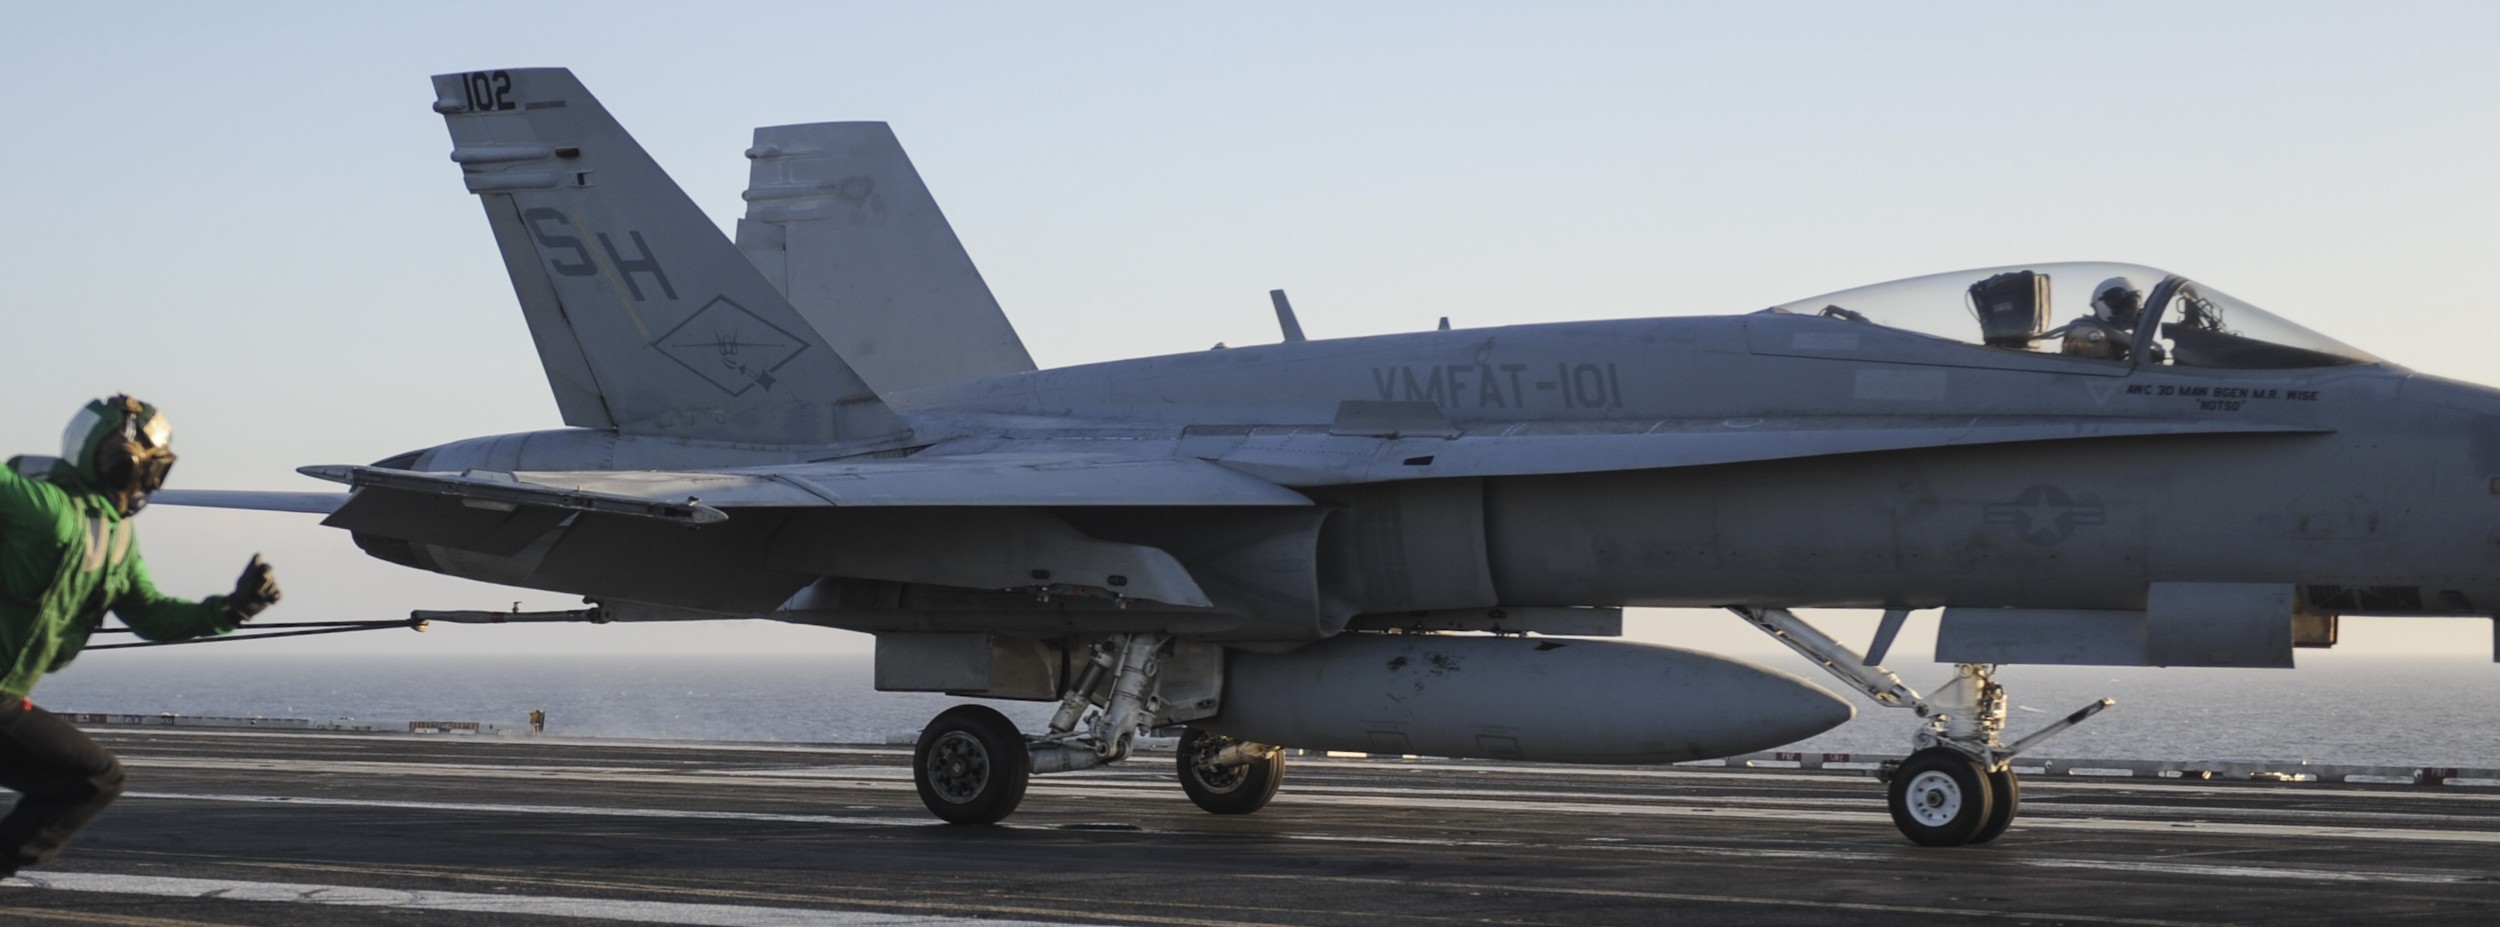 vmfat-101 sharpshooters marine fighter attack training squadron f/a-18a hornet 25